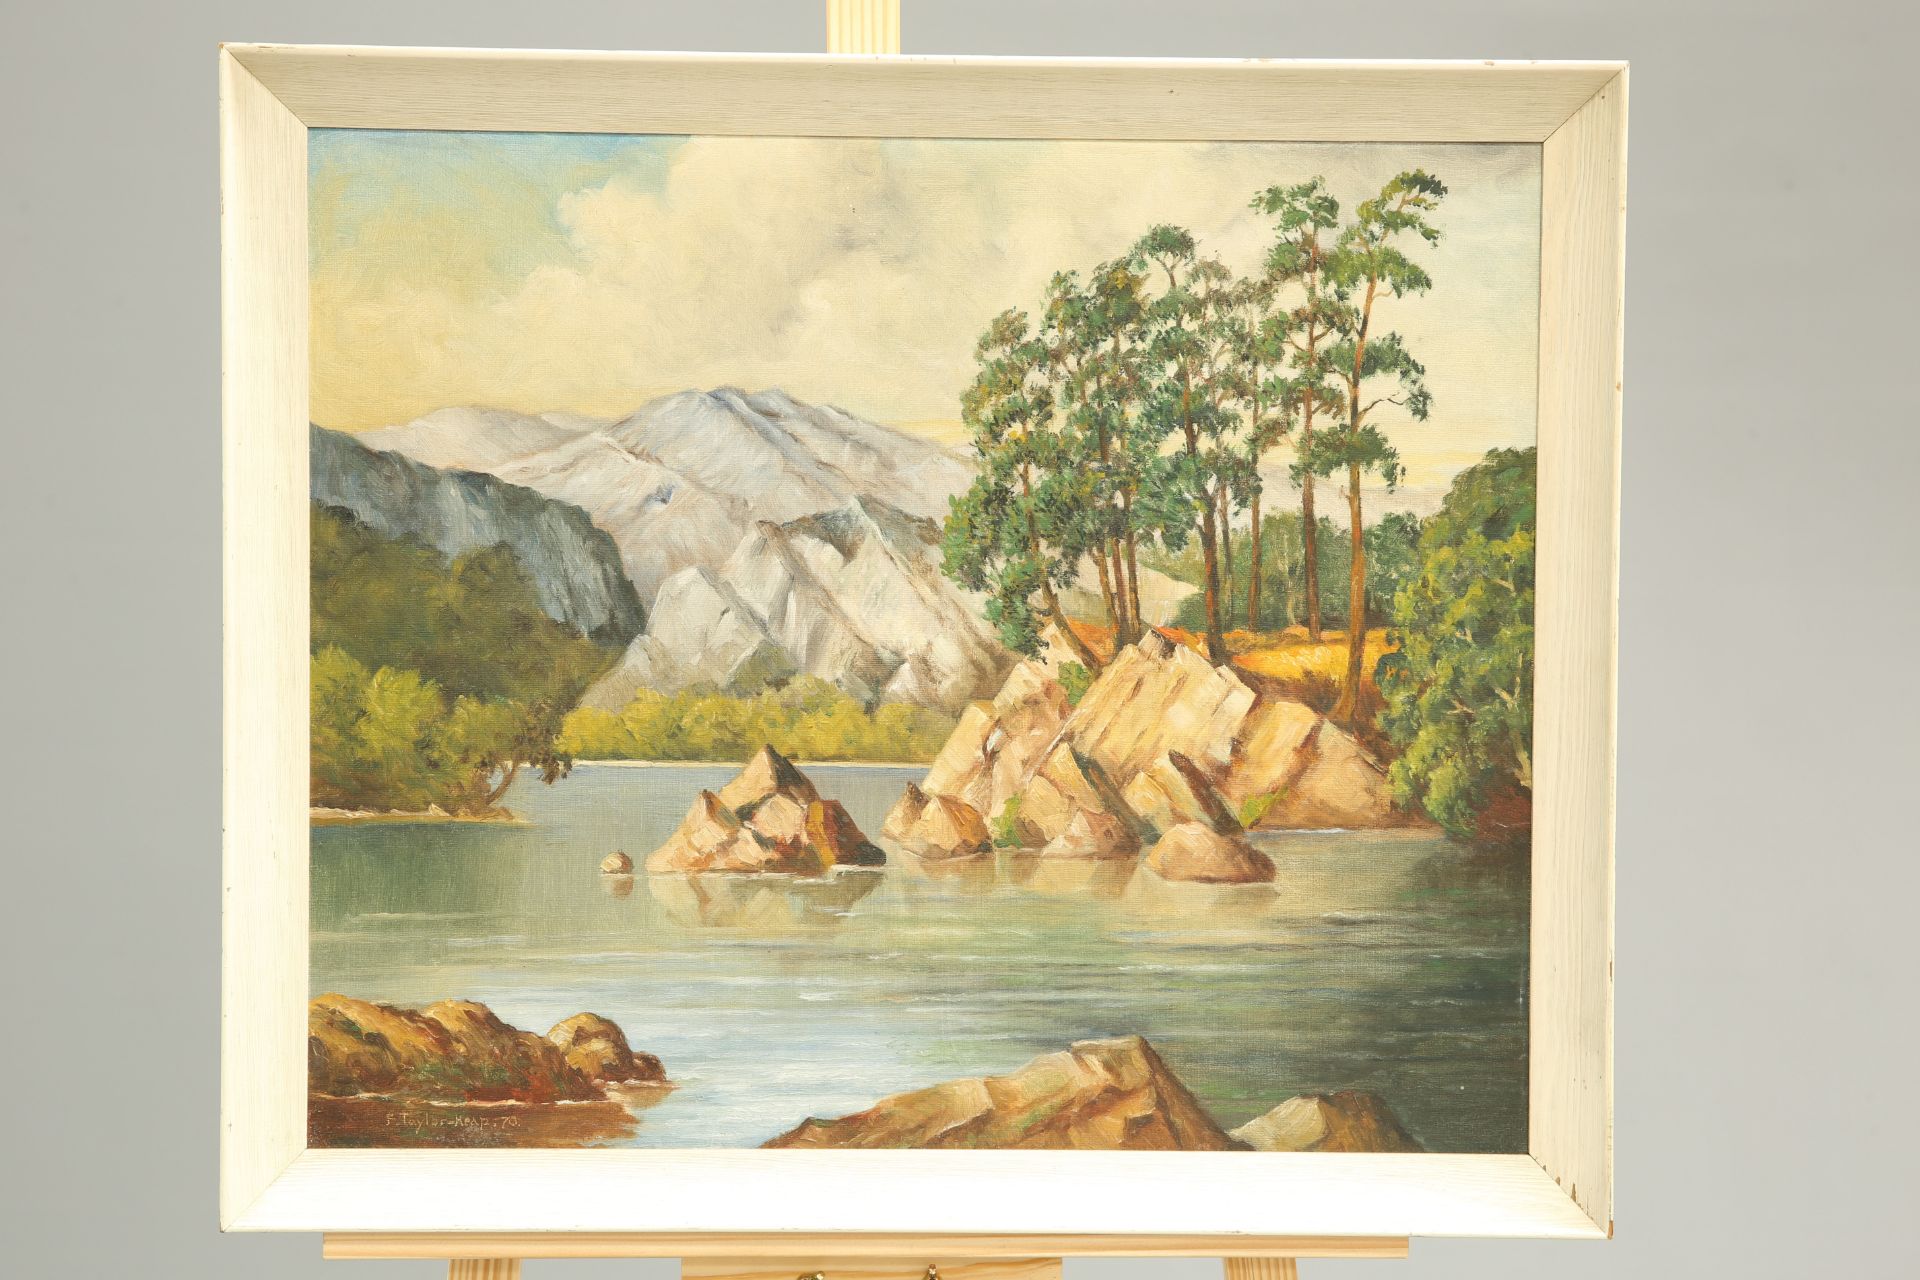 FREDERICK TAYLOR-HEAP (1893-1970), FRIARS CRAG, DERWENTWATER, signed and dated '70 lower left, oil